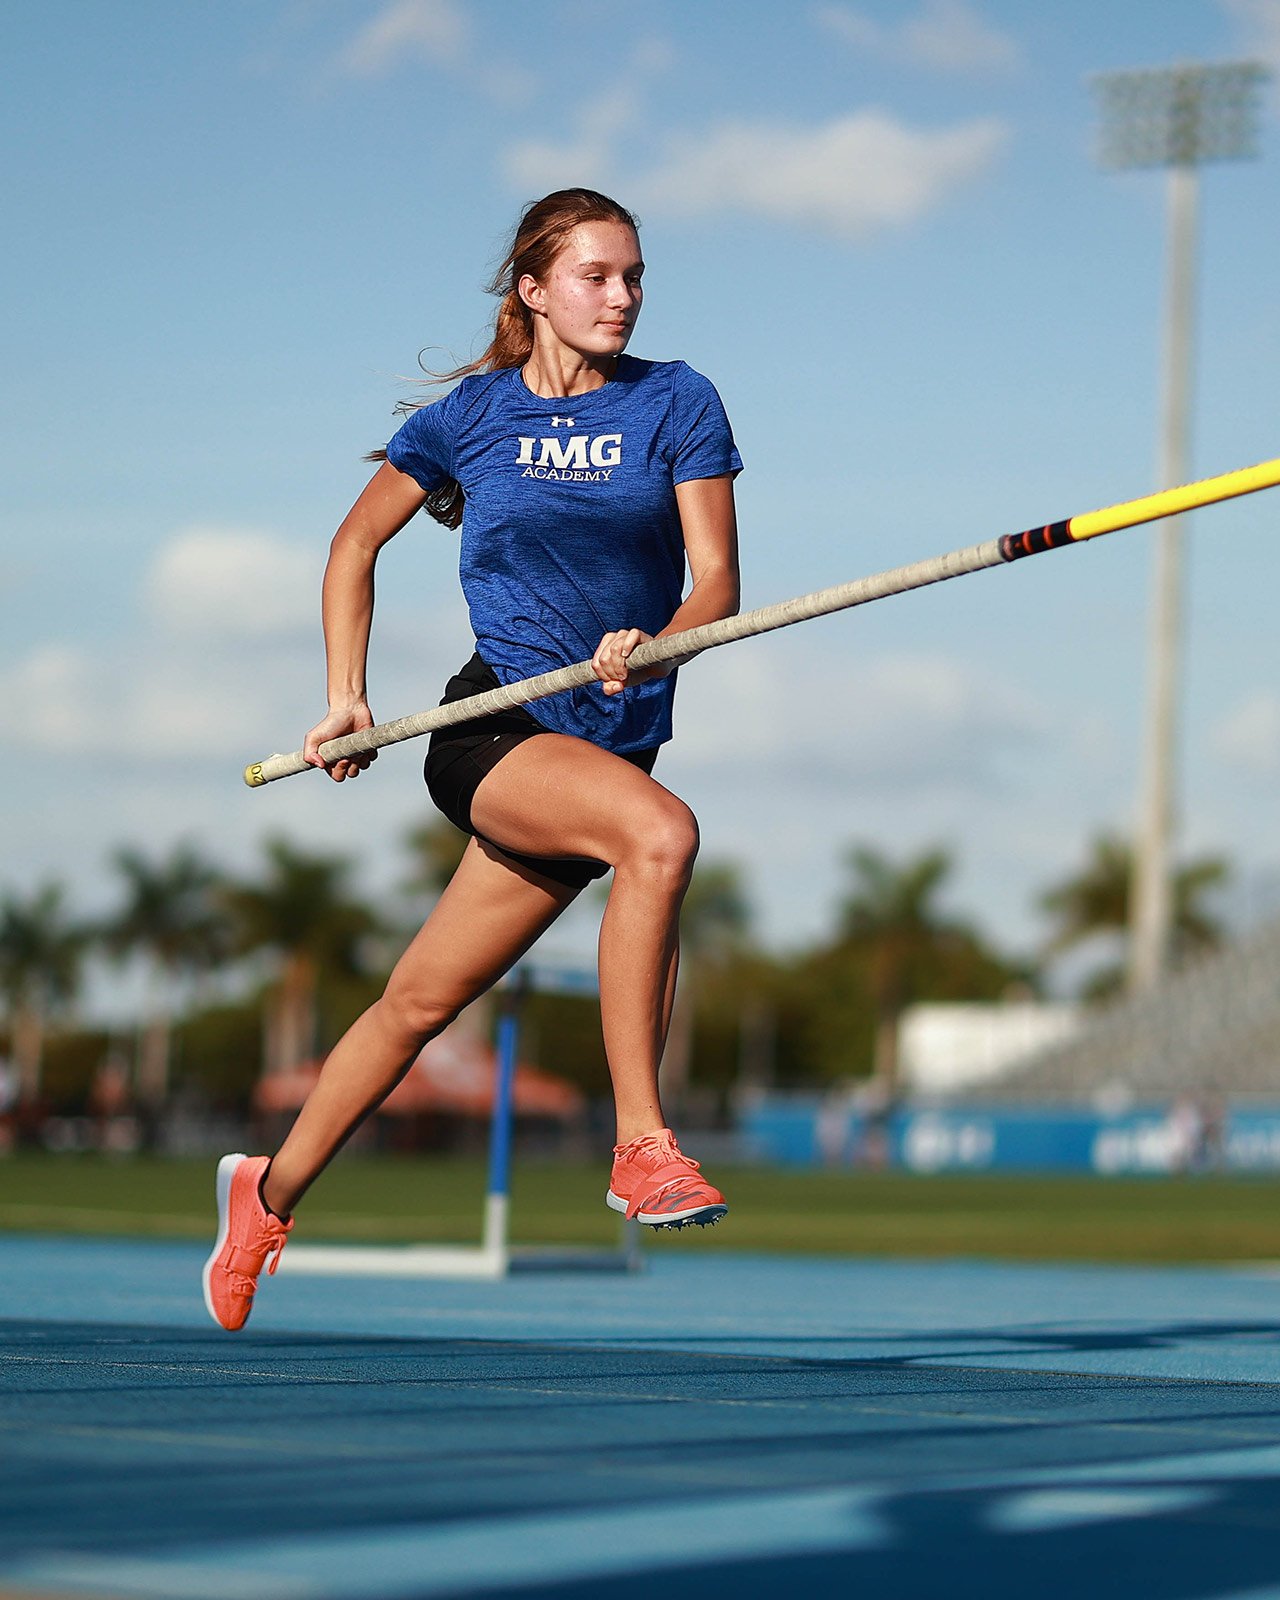 Girls Track and Field Camp Cross Country Camp IMG Academy